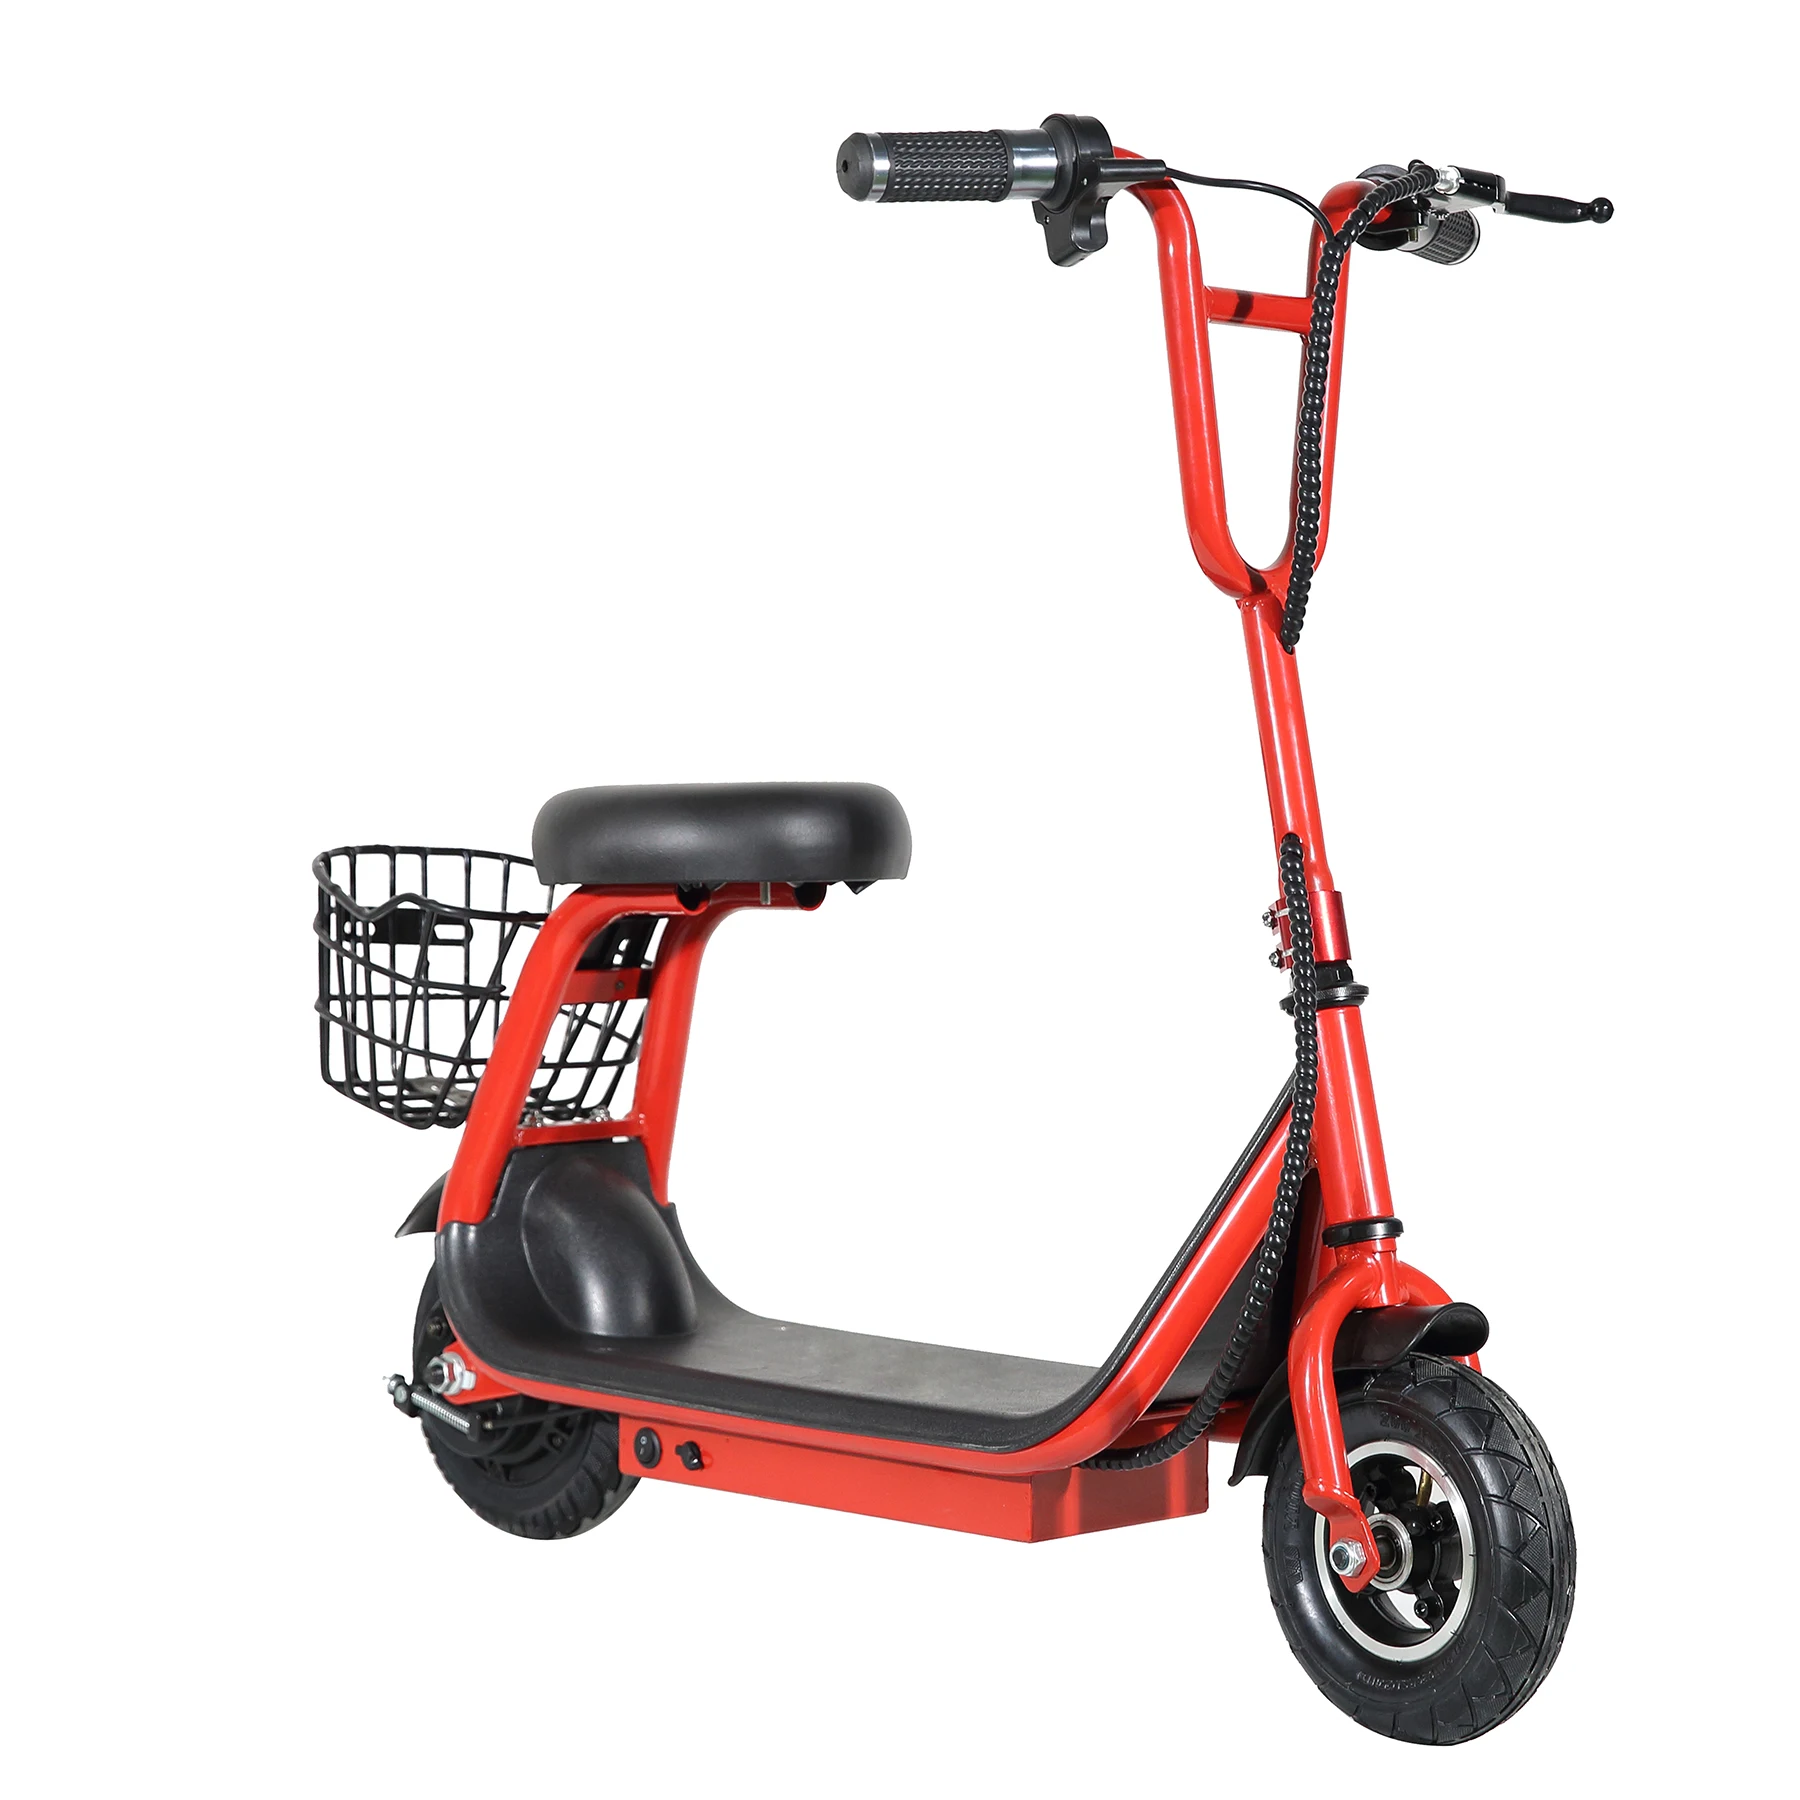 RED 250W 24V BRUSHLESS 2-SPEED LITHIUM POWERED M8 KIDS ELECTRIC SCOOTER